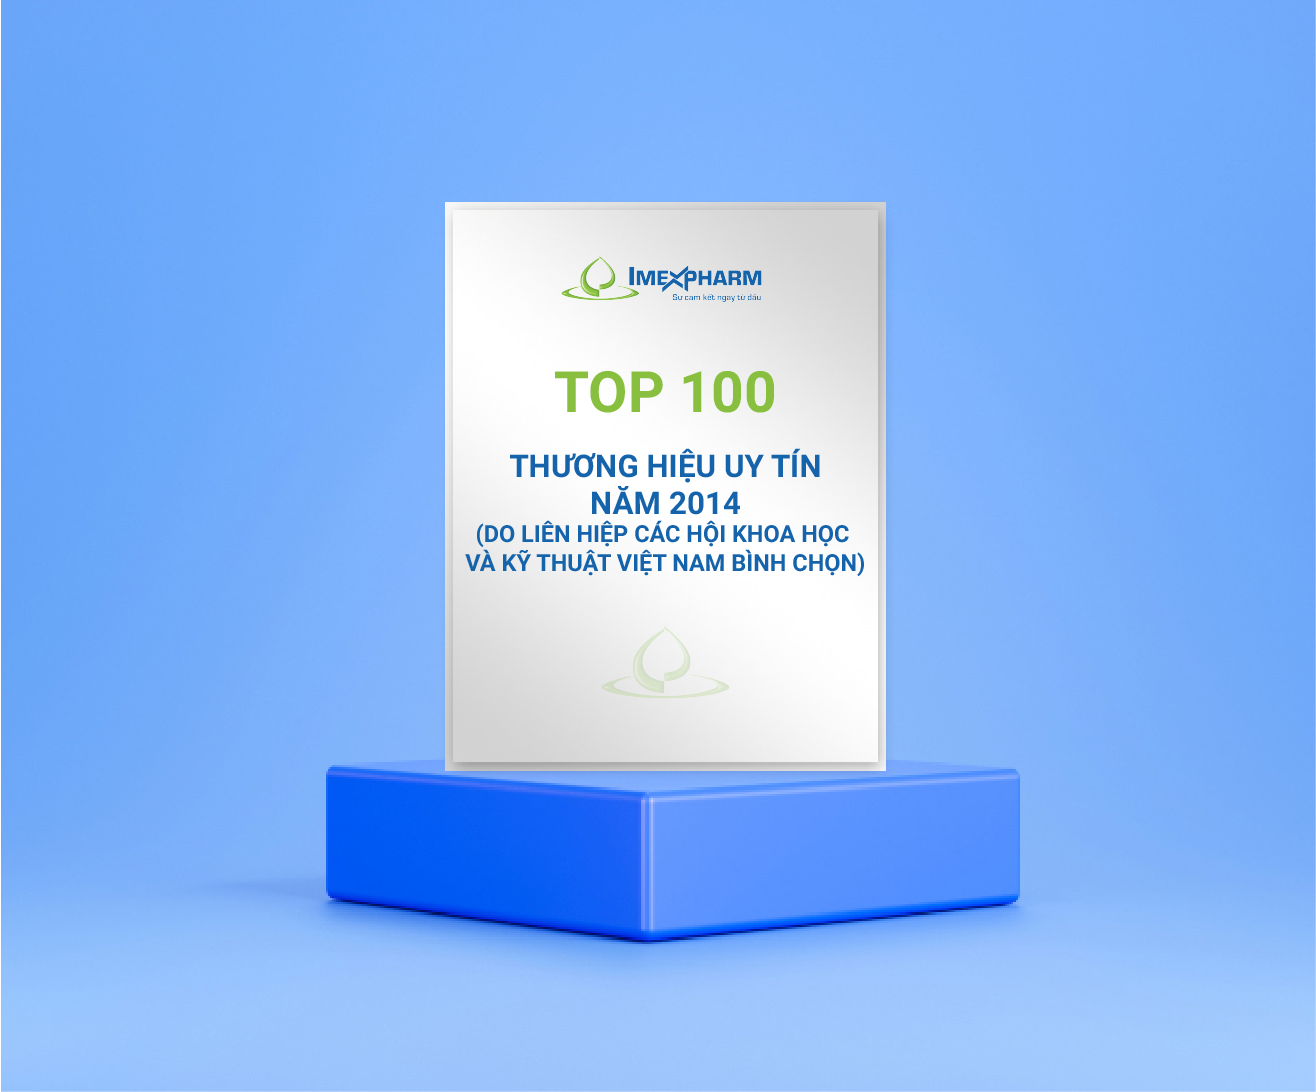 Top 100 prestigious brands in 2014 (voted by the Vietnam Federation of Science and Technology Associations).